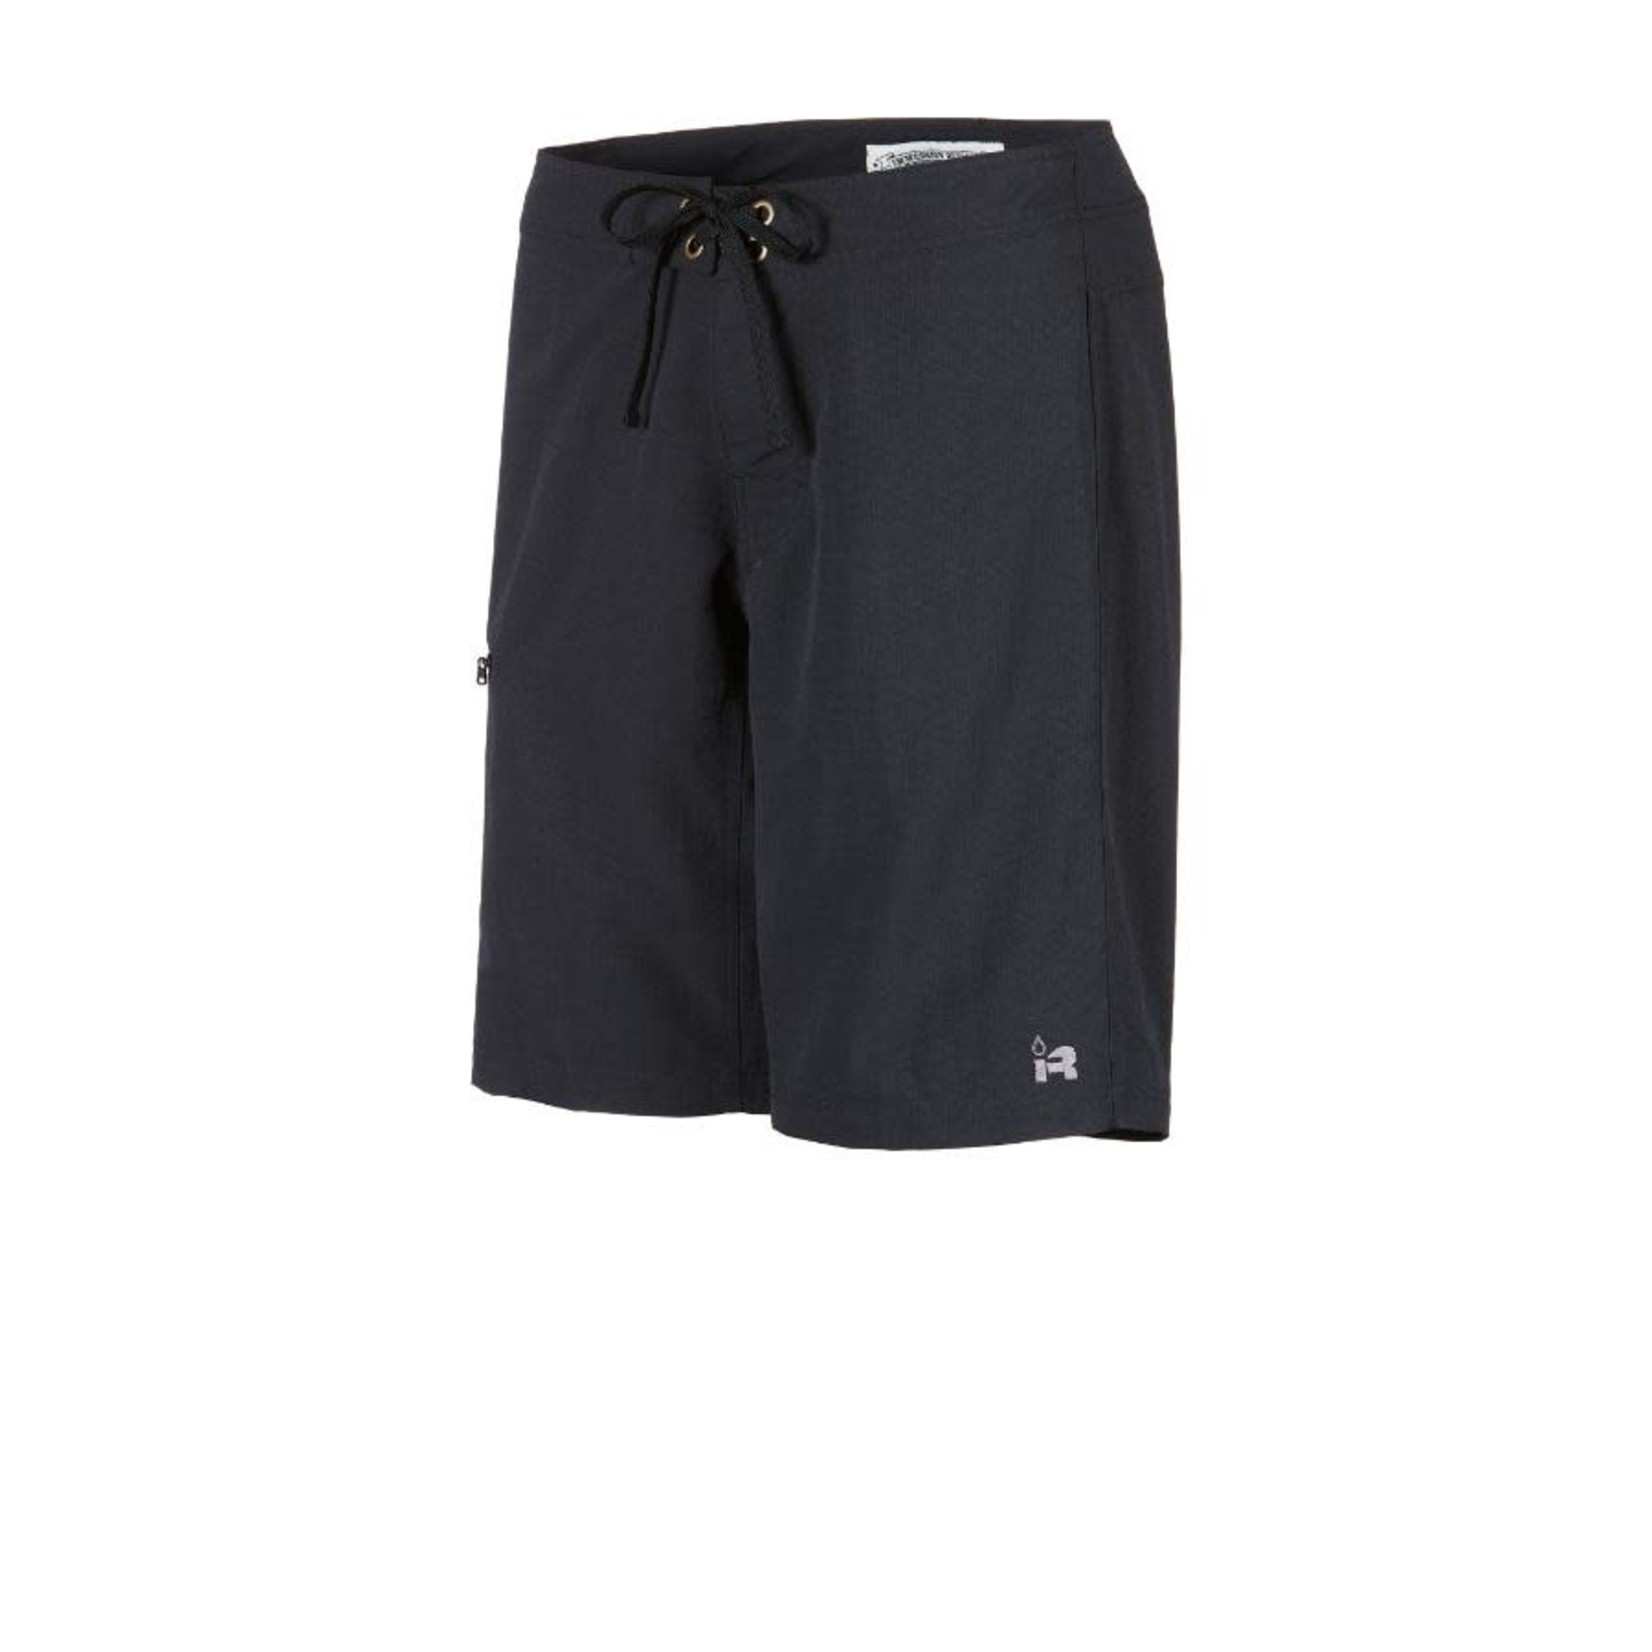 Immersion Research Immersion Research Men's Guide Shorts